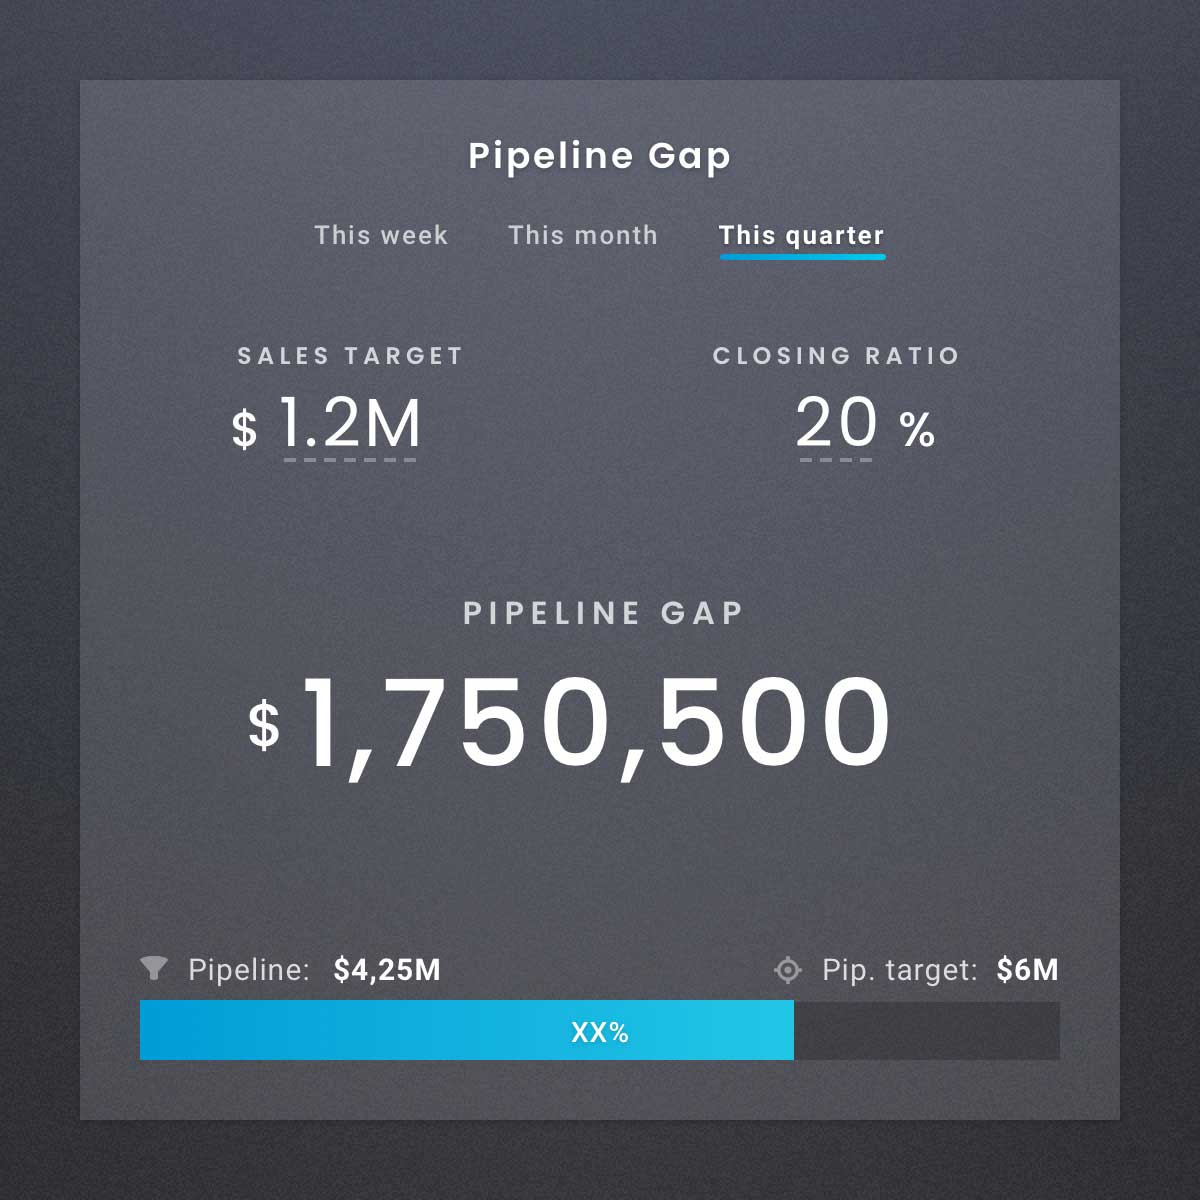 Visual Pipeline Gap your reach your goals